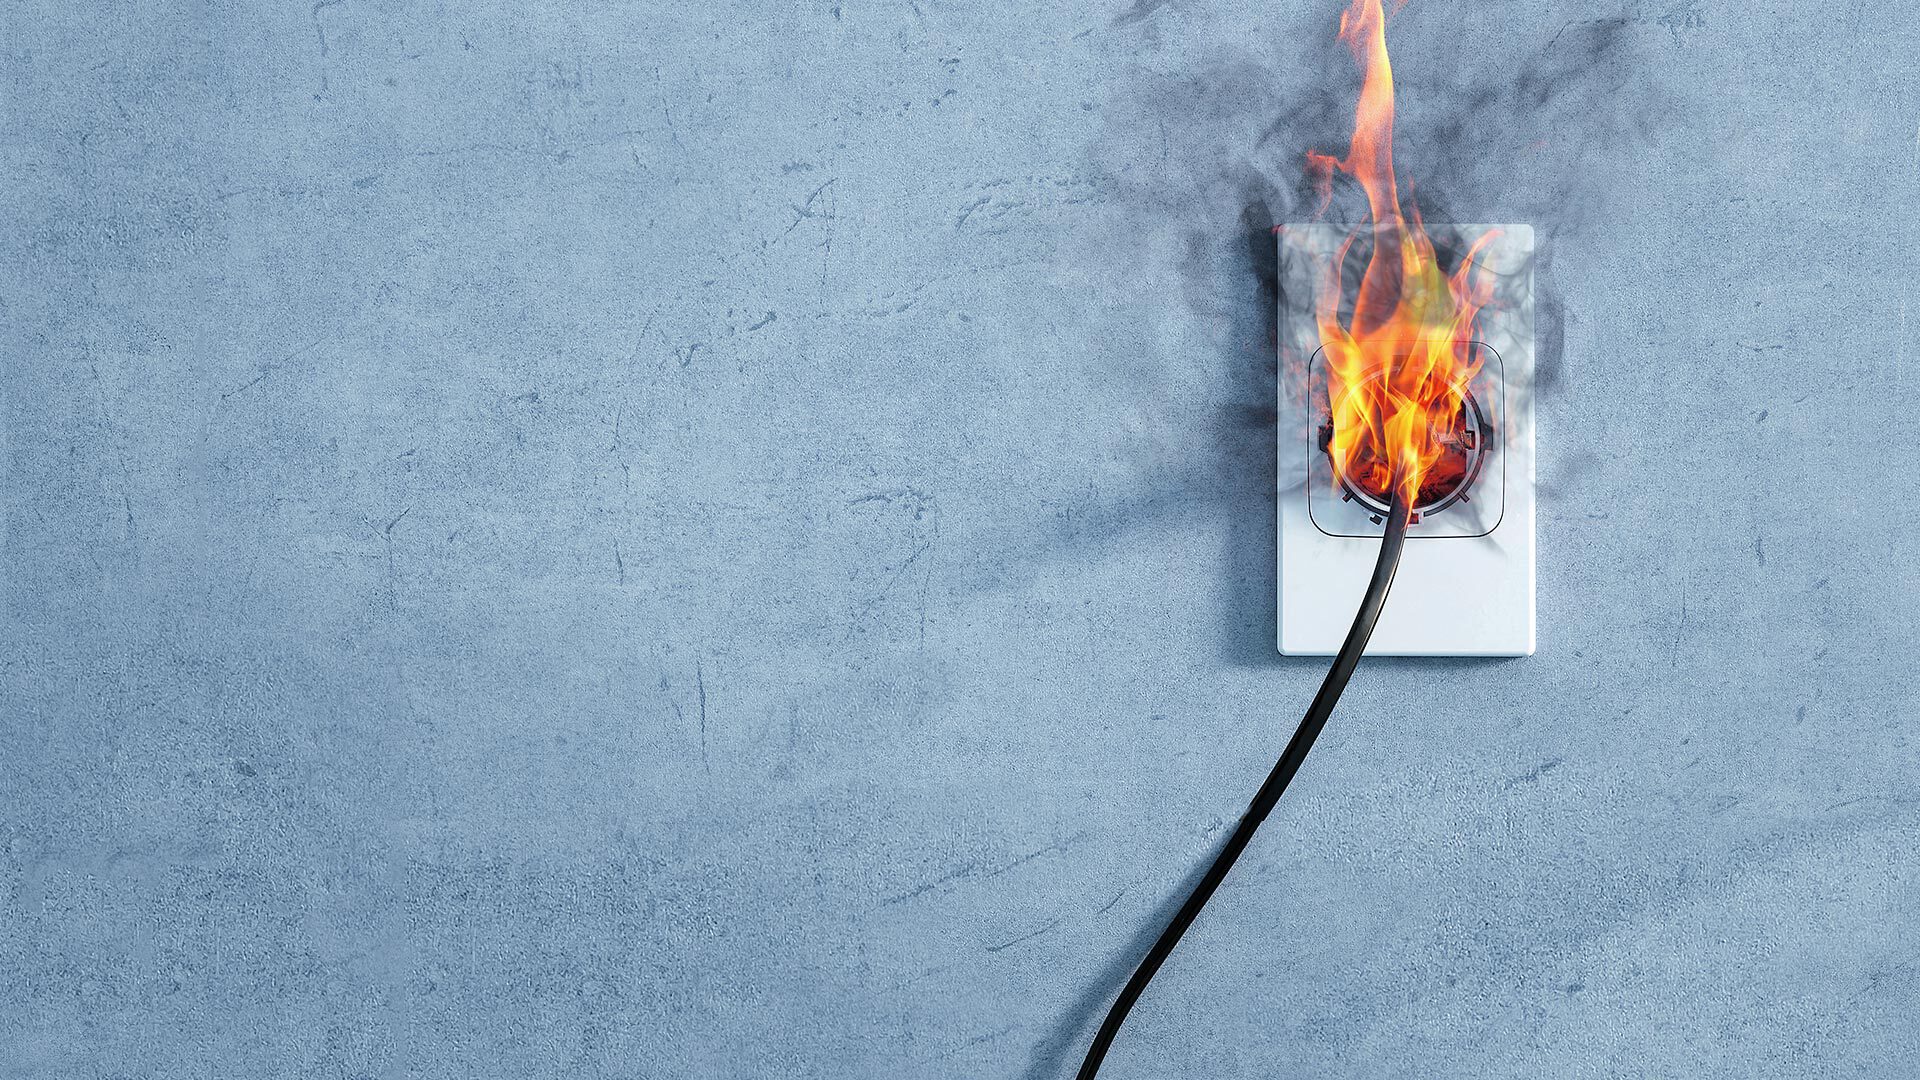 Power plug in a wall socket being dangerously on fire